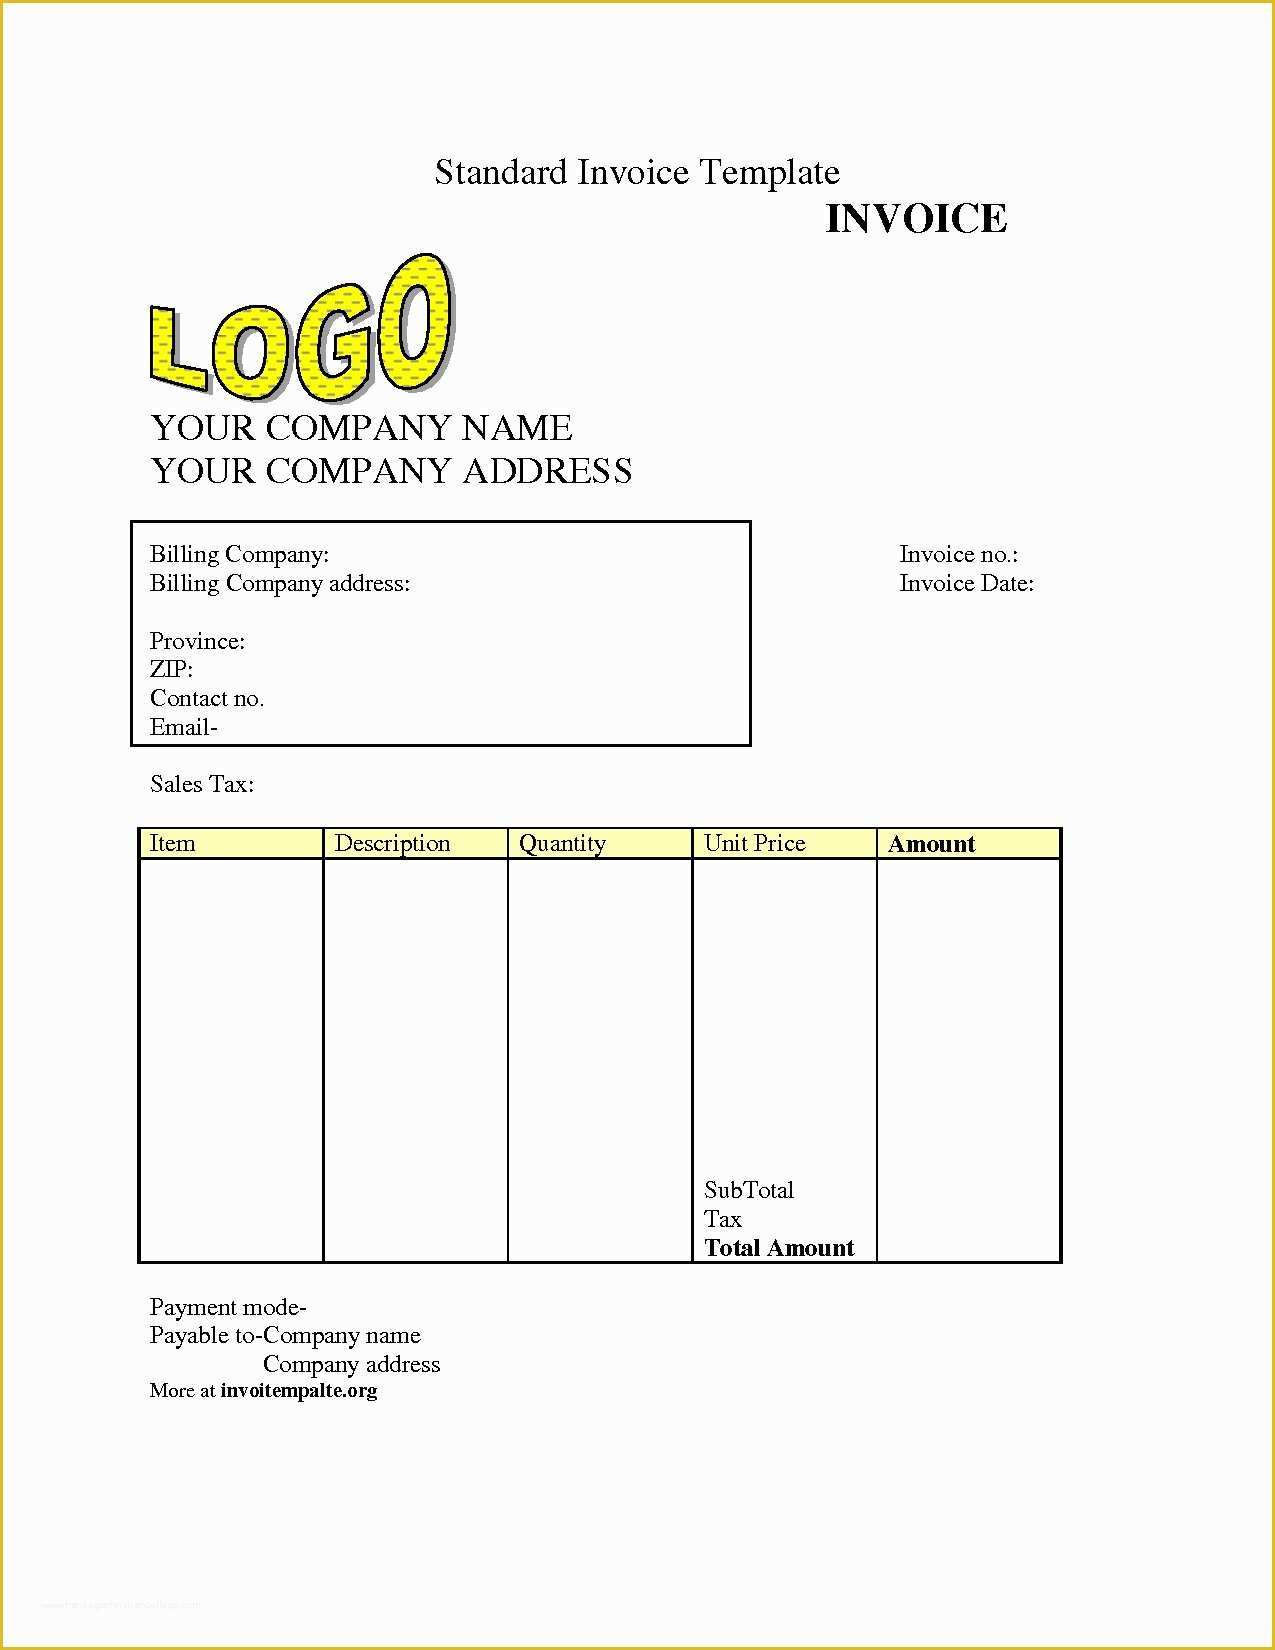 Free Online Invoice Template Of Free Invoice Template Downloads Invoice Template Ideas